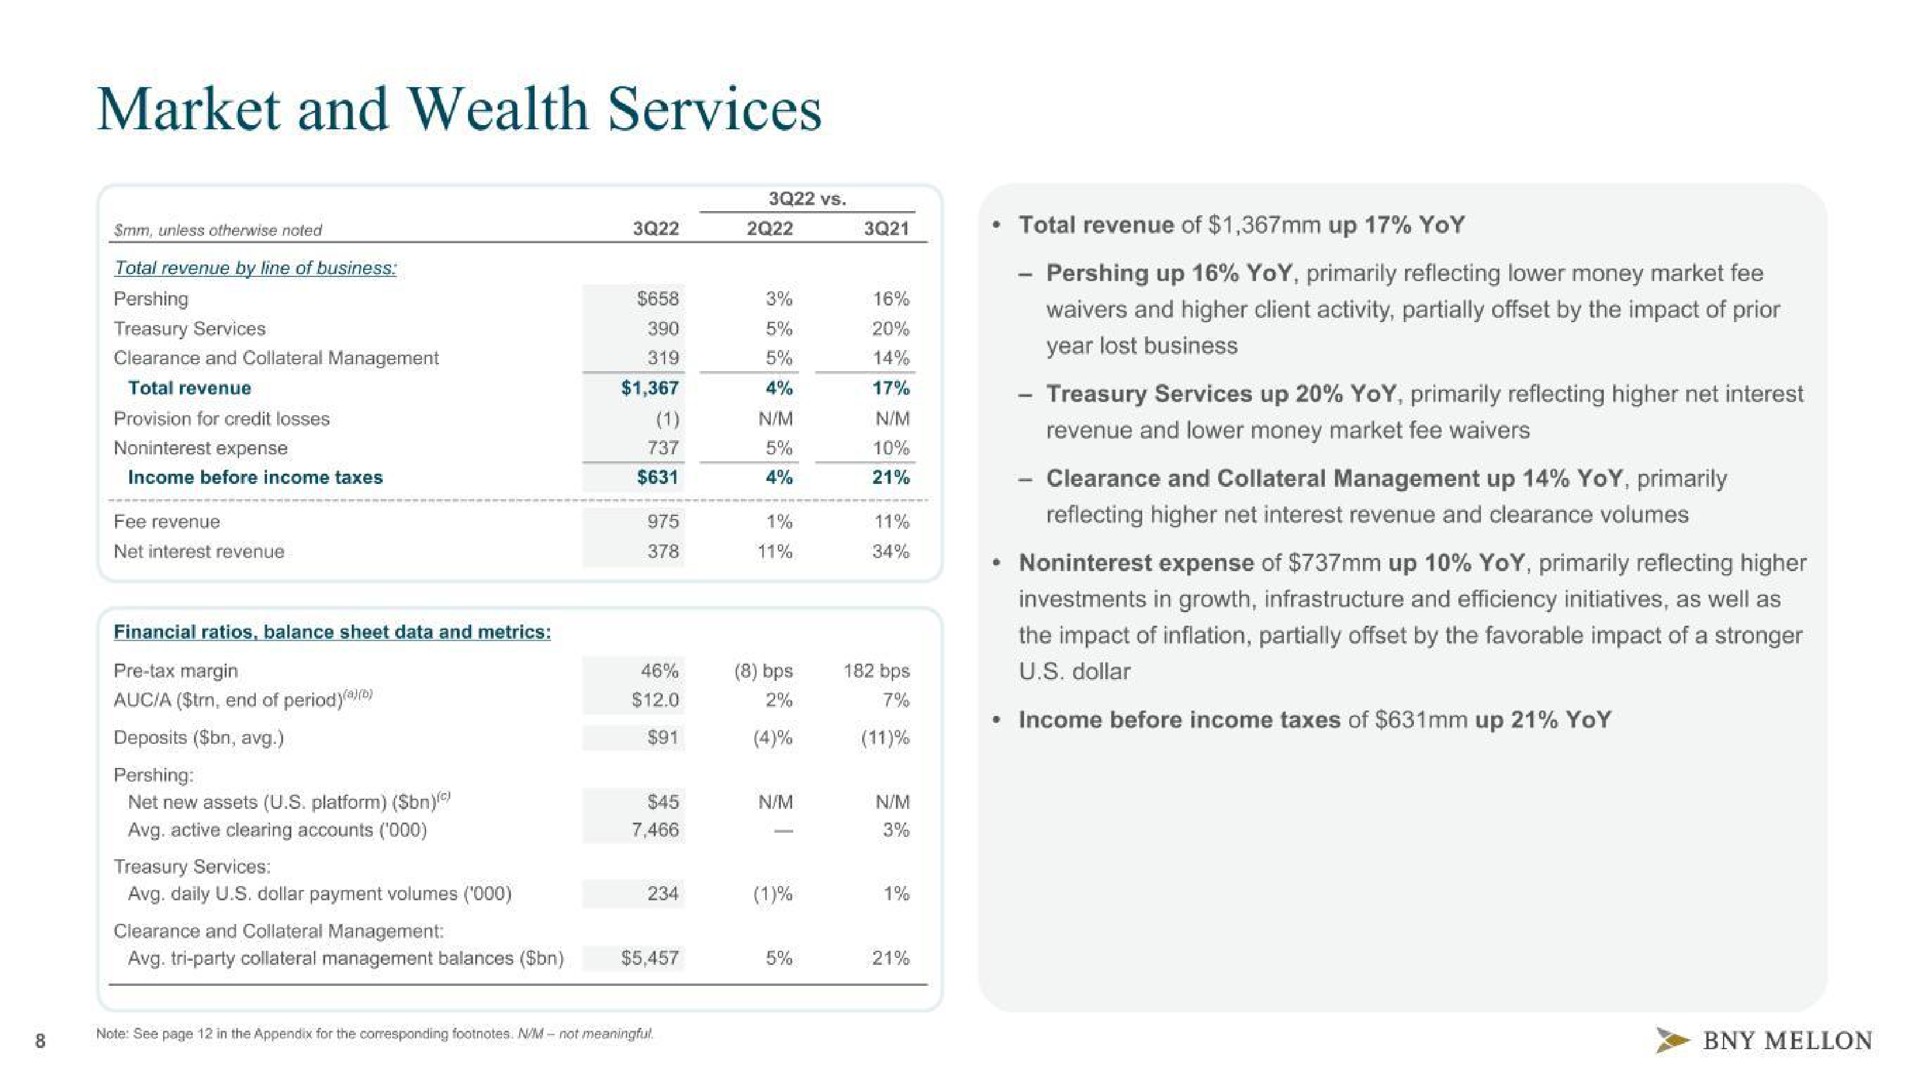 market and wealth services inert a i revenue and lower money market fee waivers expense of up yoy primarily reflecting higher | BNY Mellon